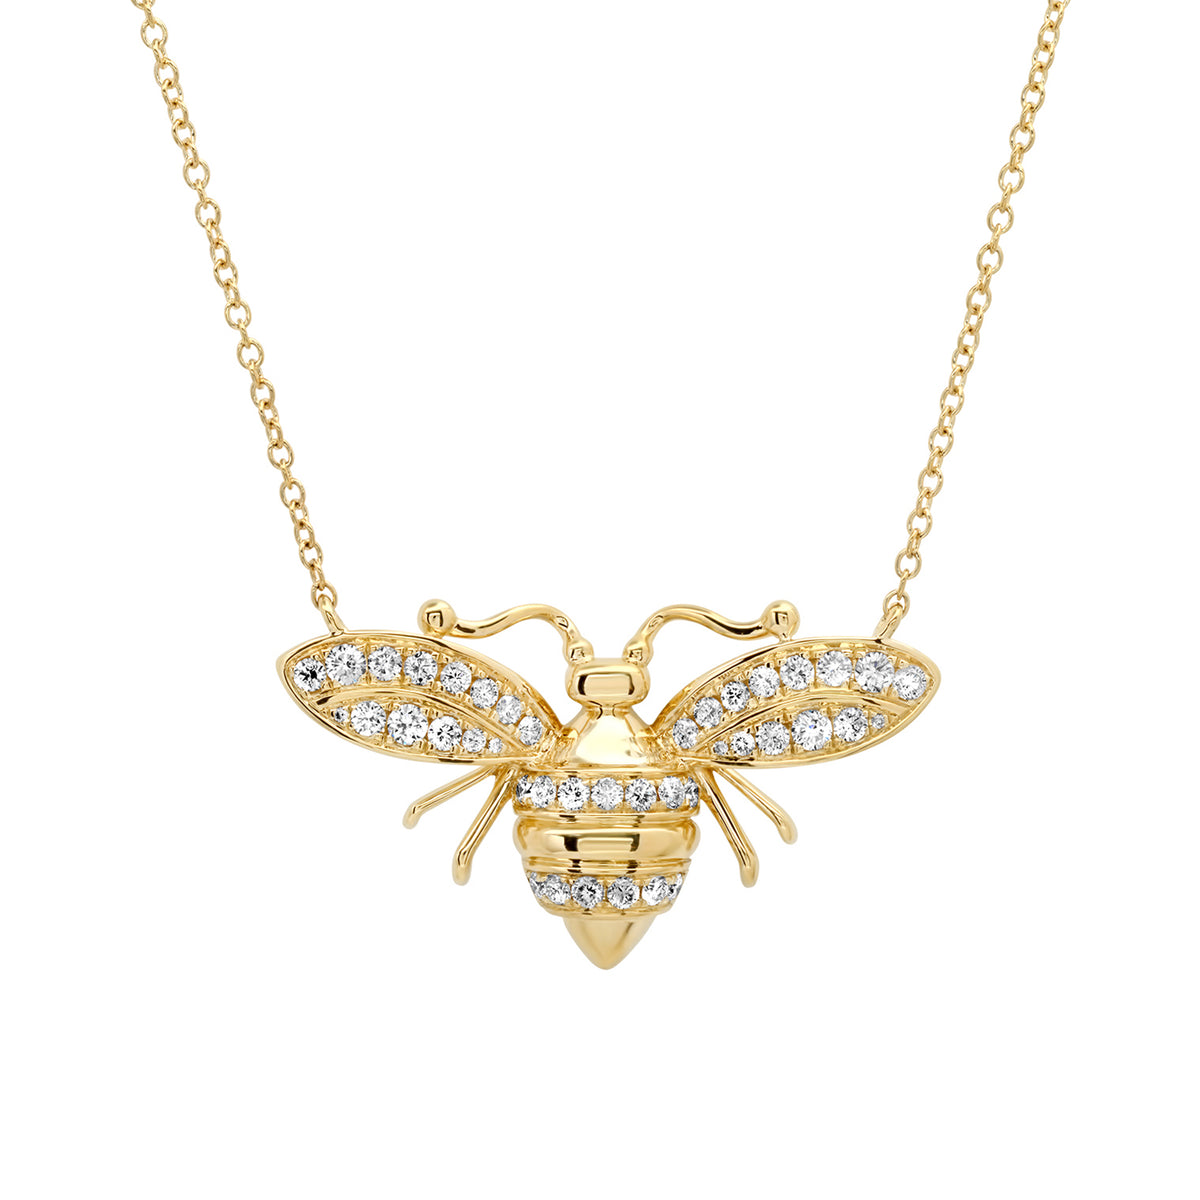 Large Bee Necklace in Diamond & 14k Yellow Gold Sunny Hostin